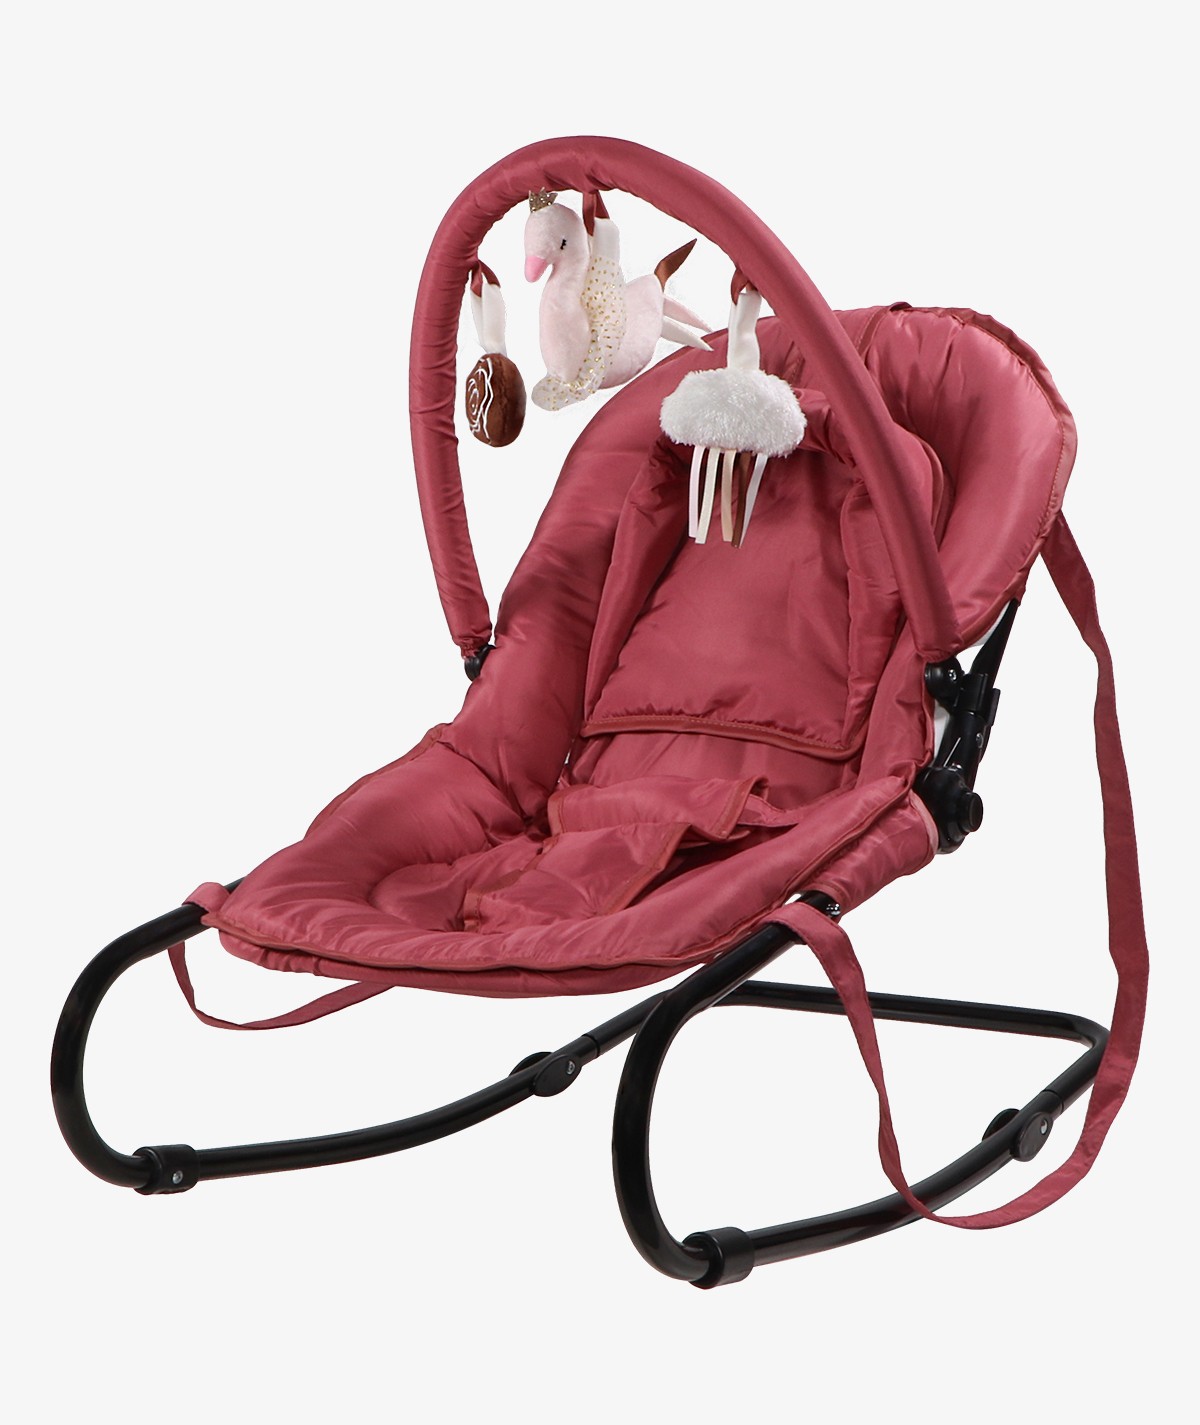 Swan Ivy Pink Bouncer